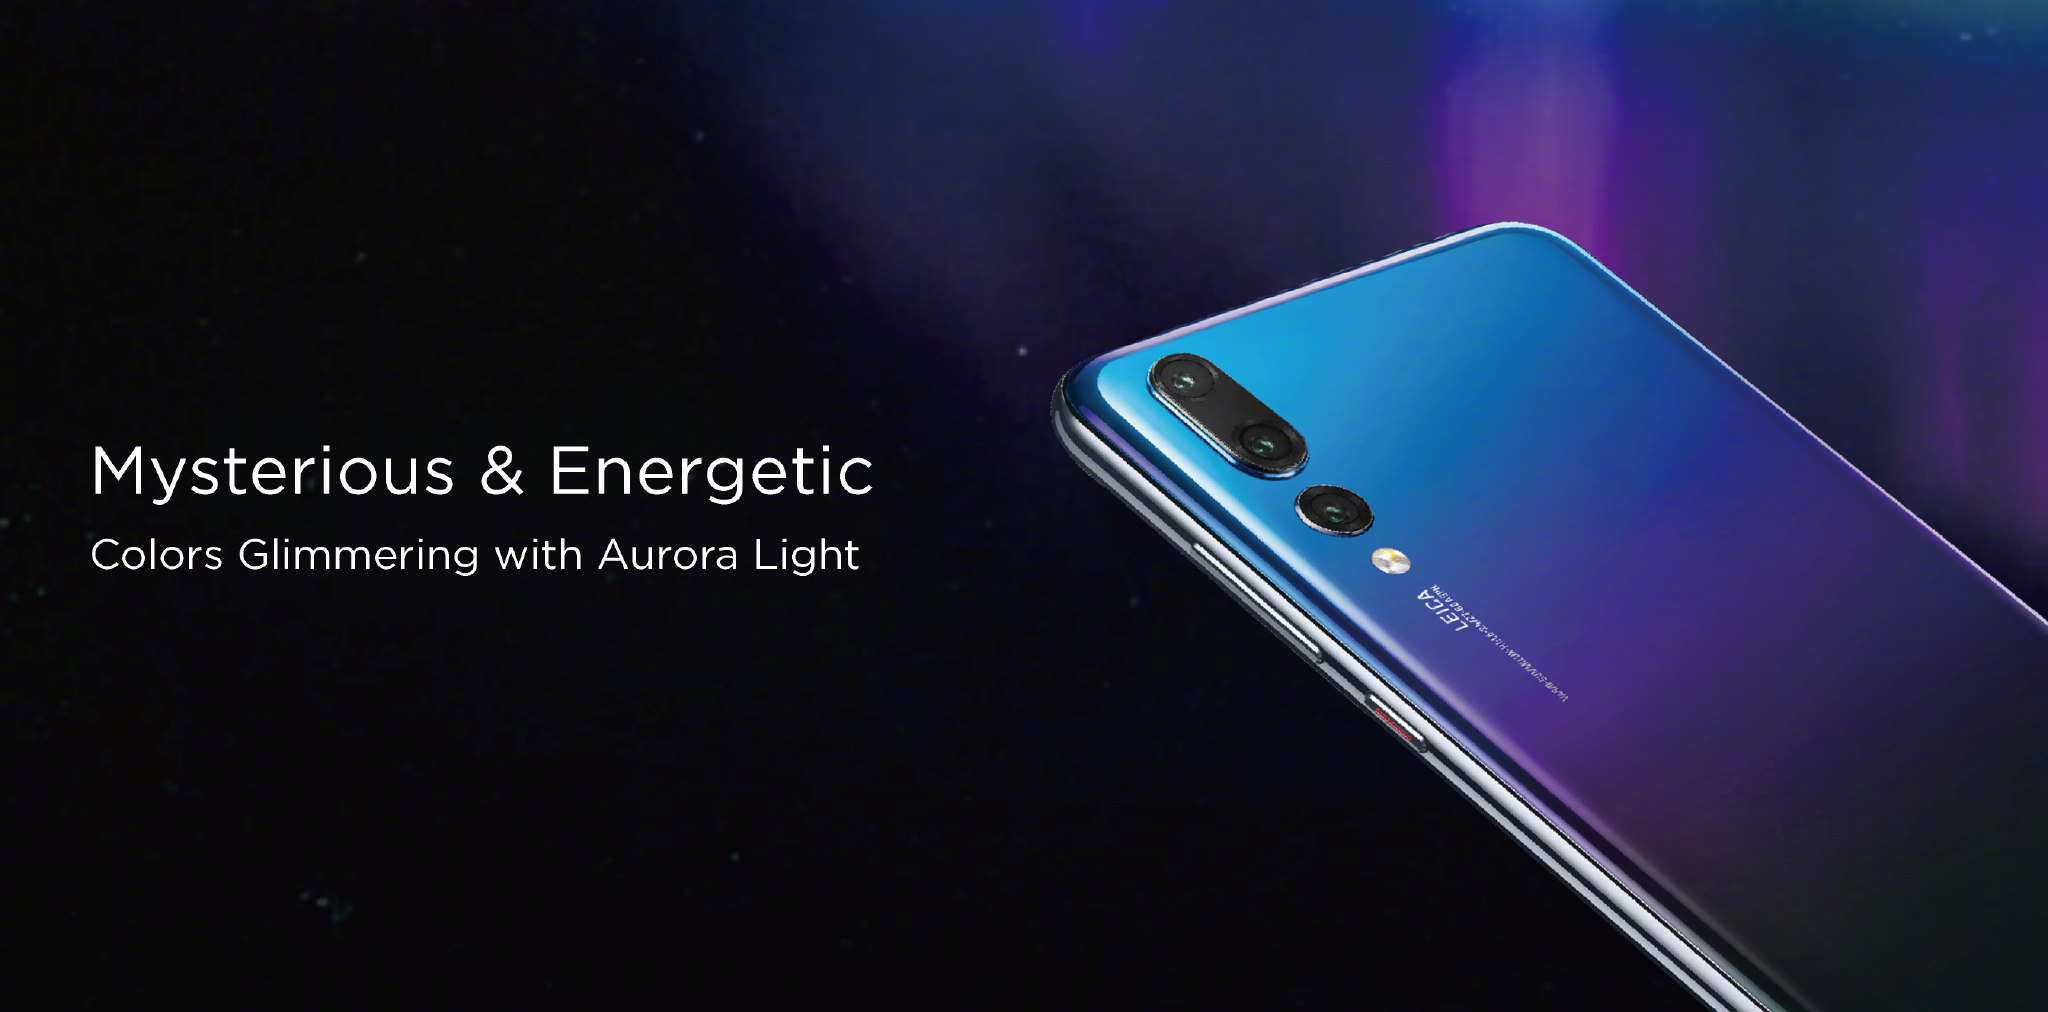 Huawei P20 Pro now available in Morpho Aurora and Pearl White colours 1